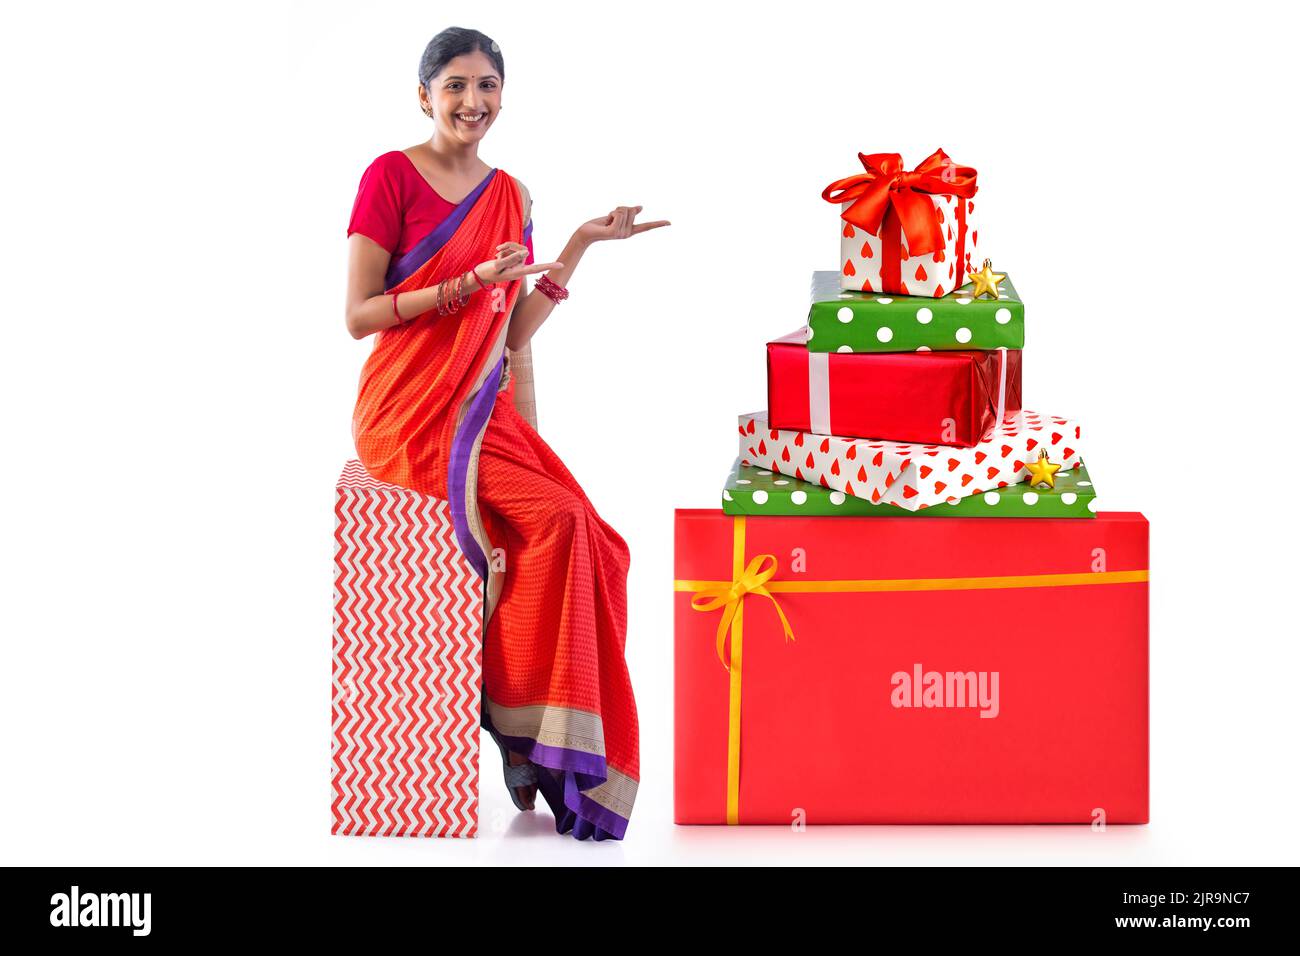 Cheerful woman sitting on gift box against white background Stock Photo